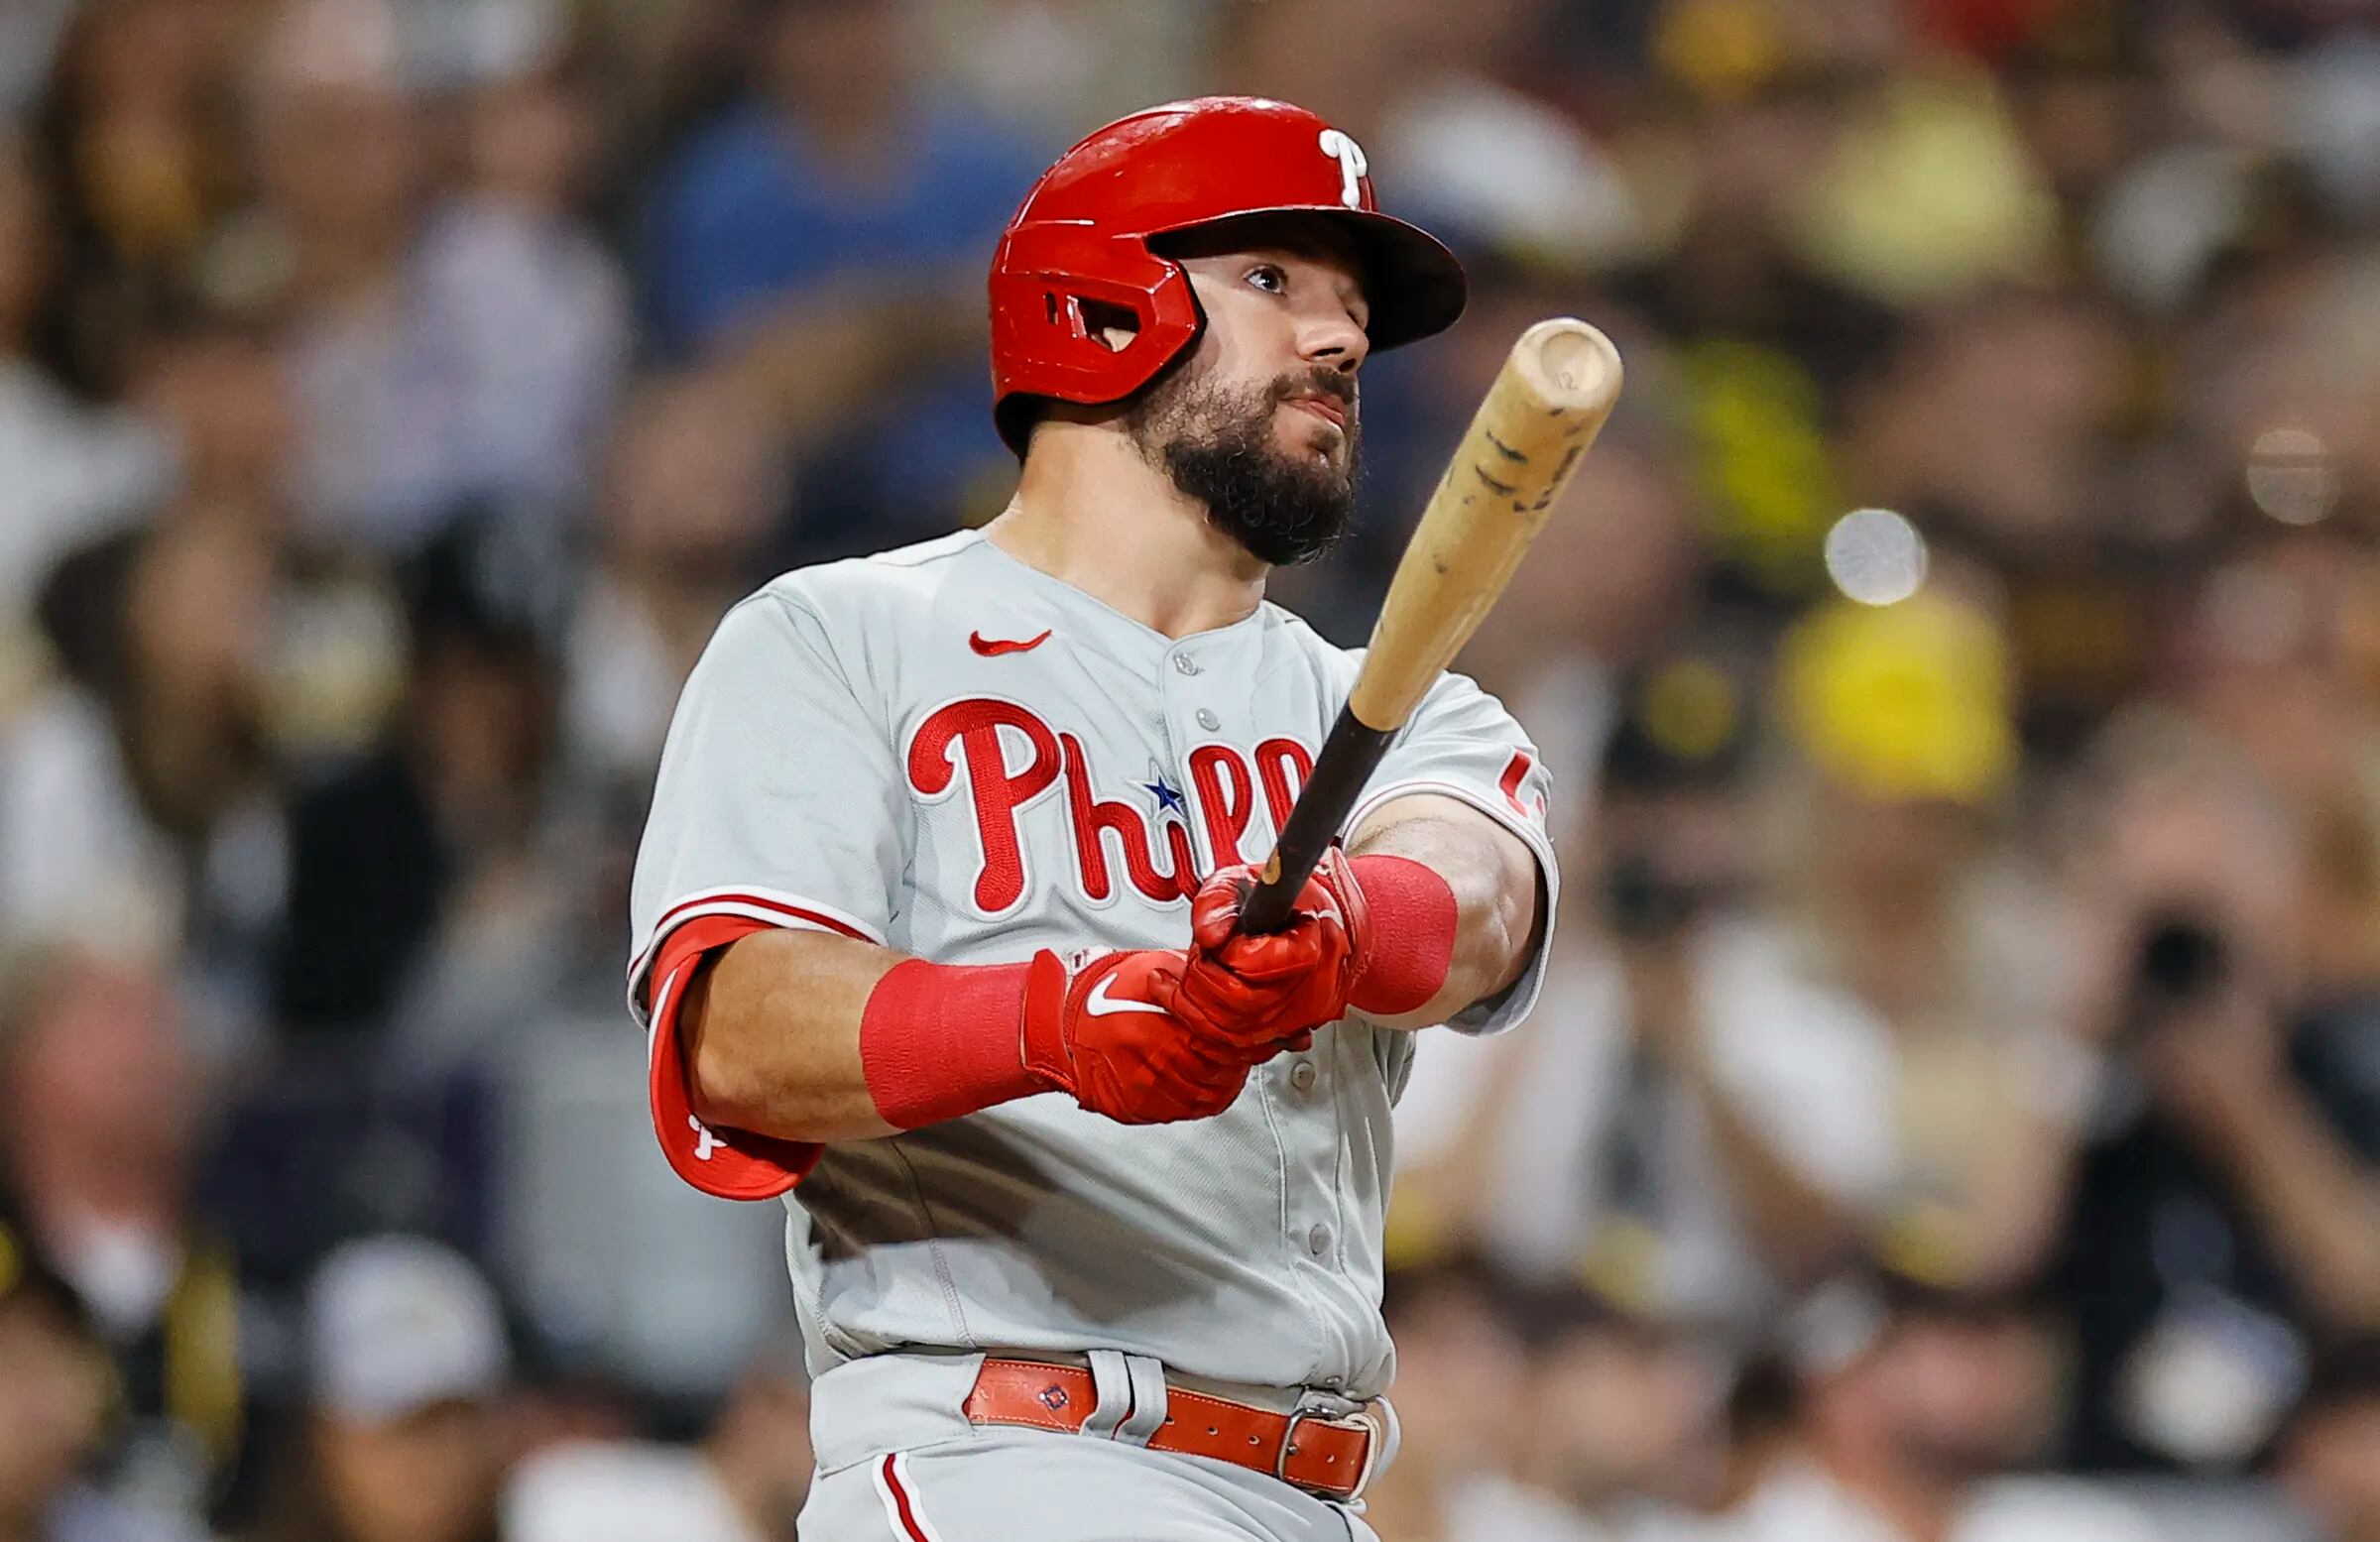 Schwarber walks it off for Phillies to cap disheartening series for Padres  – NBC 7 San Diego